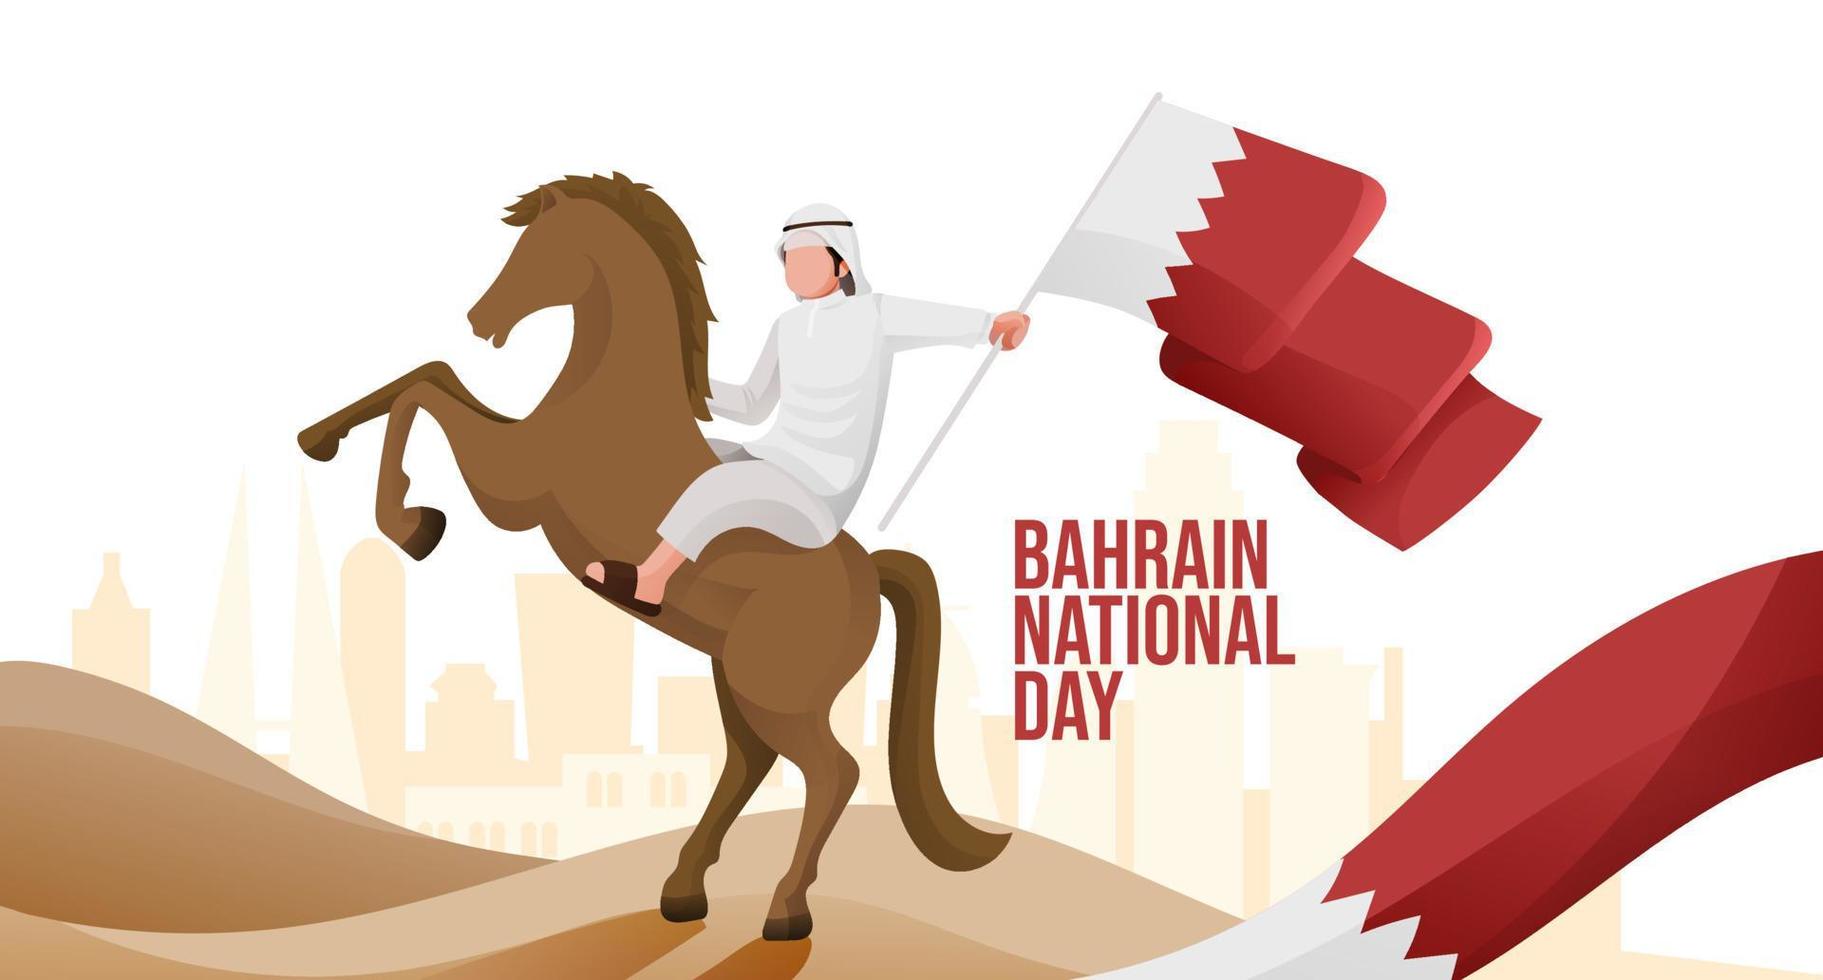 Bahrain National Day Banner With Cartoon Man Holding Flag on Horse Illustration Concept vector